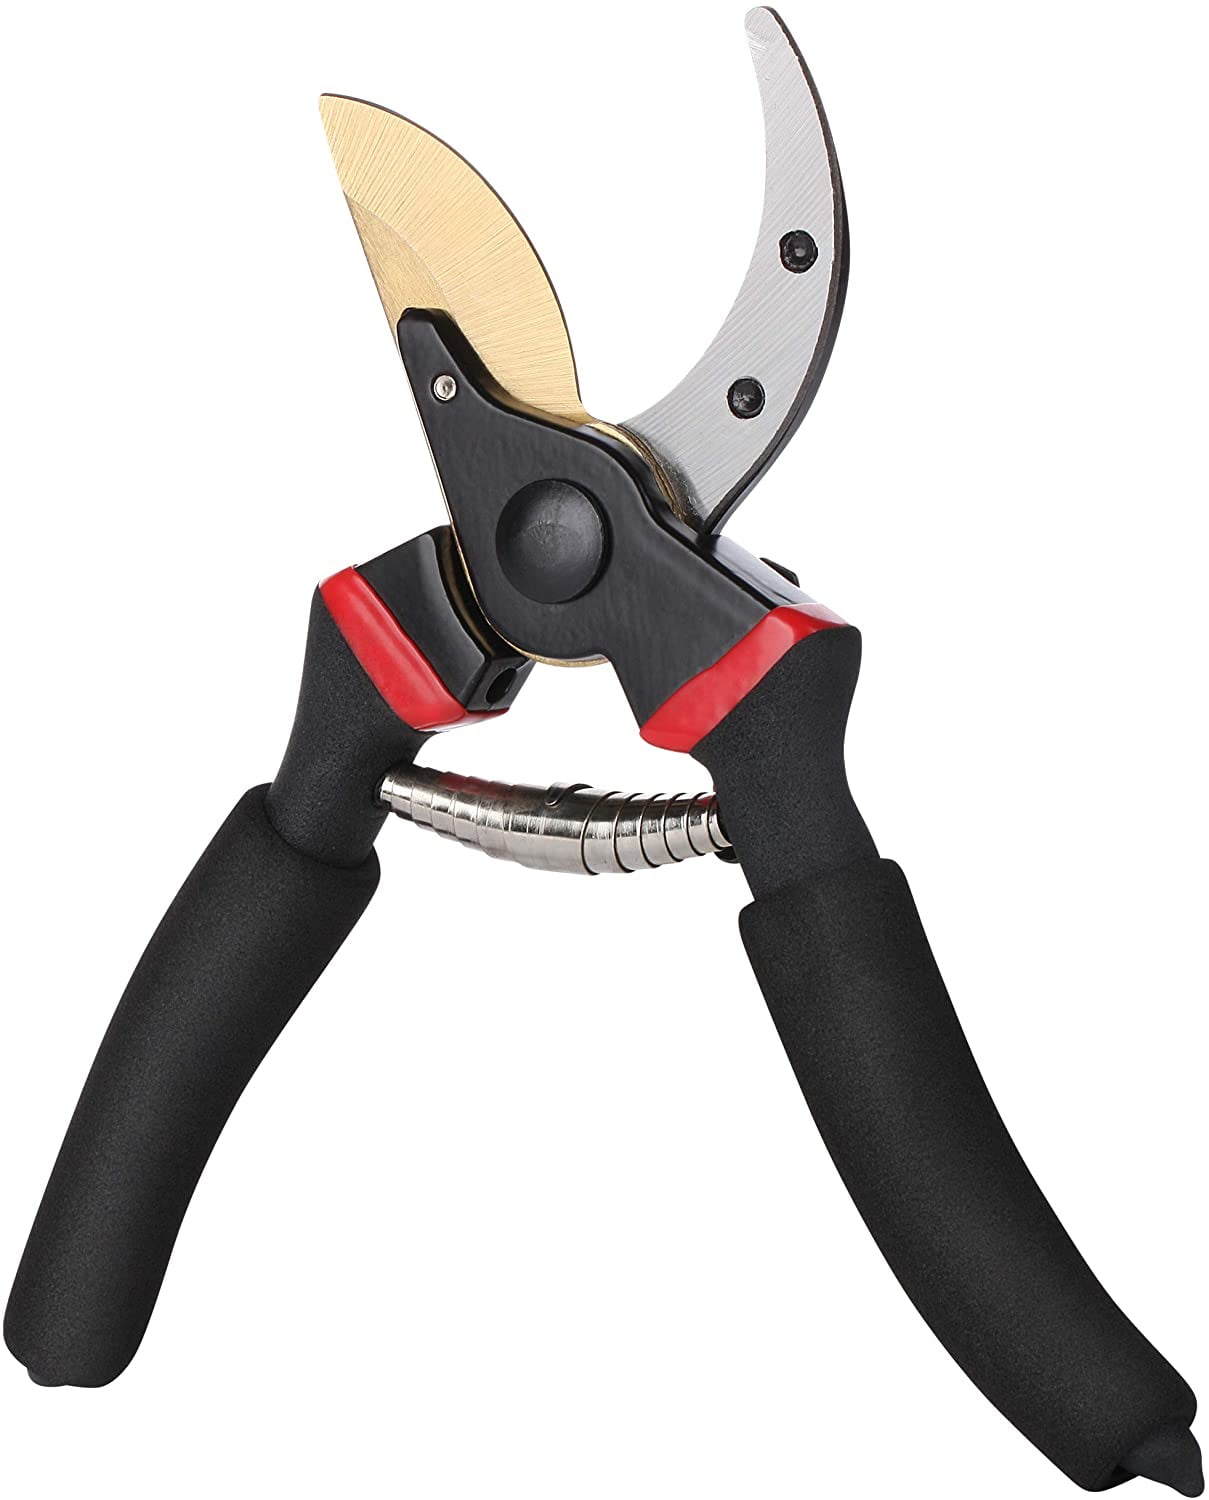 Garden Shears Scissor Cutting Tree Fruit Pruning Grafting Tools Vintage Clippers 